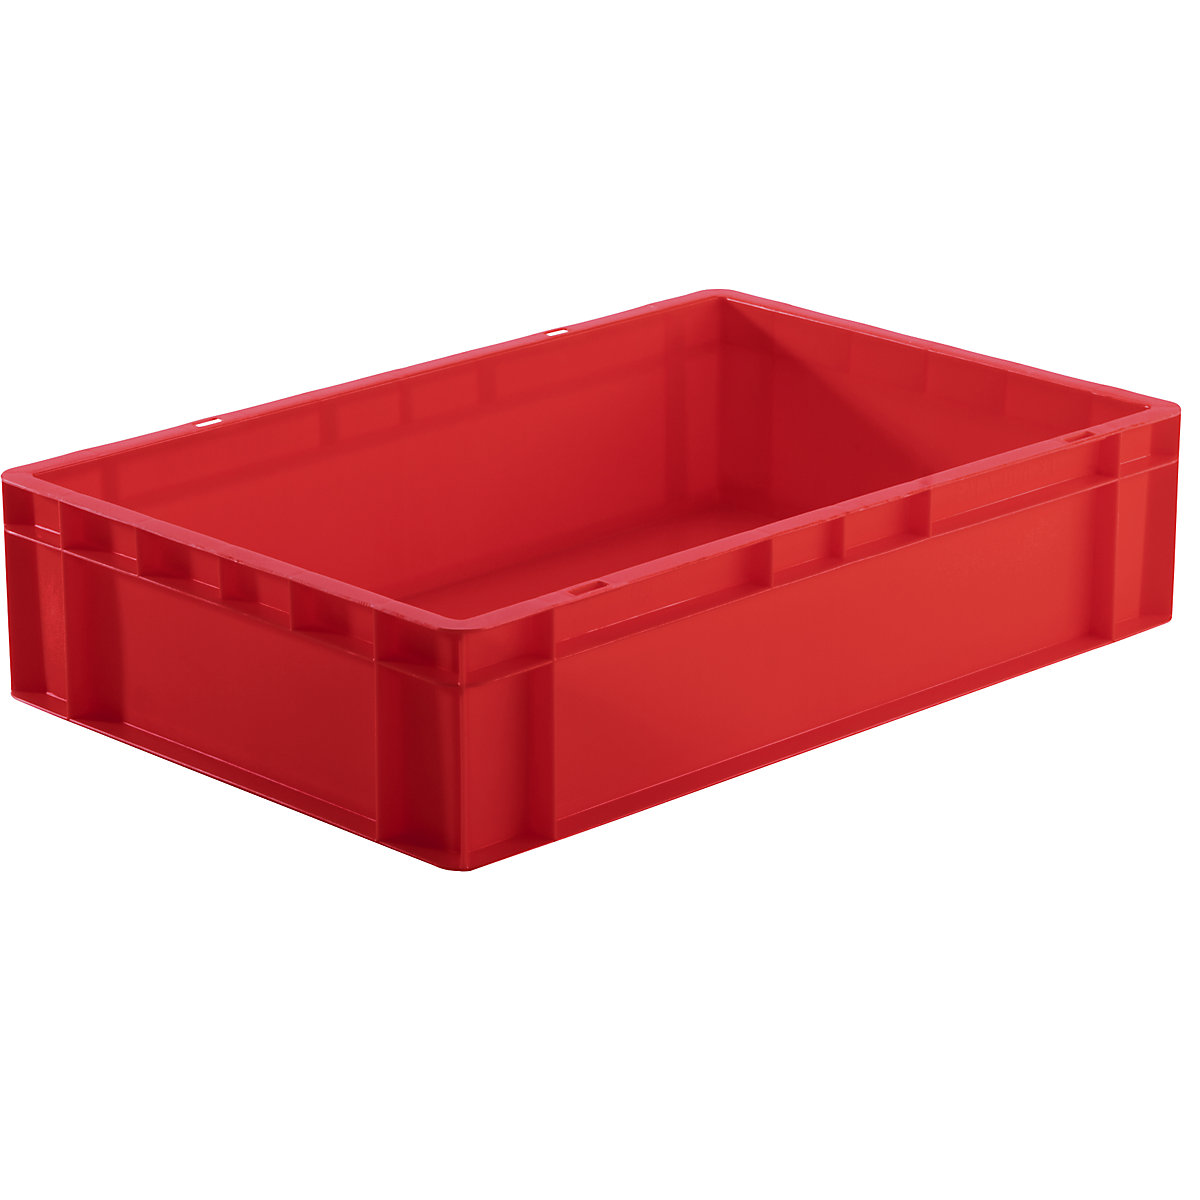 Euro stacking container, closed walls and base, LxWxH 600 x 400 x 145 mm, red, pack of 5-5